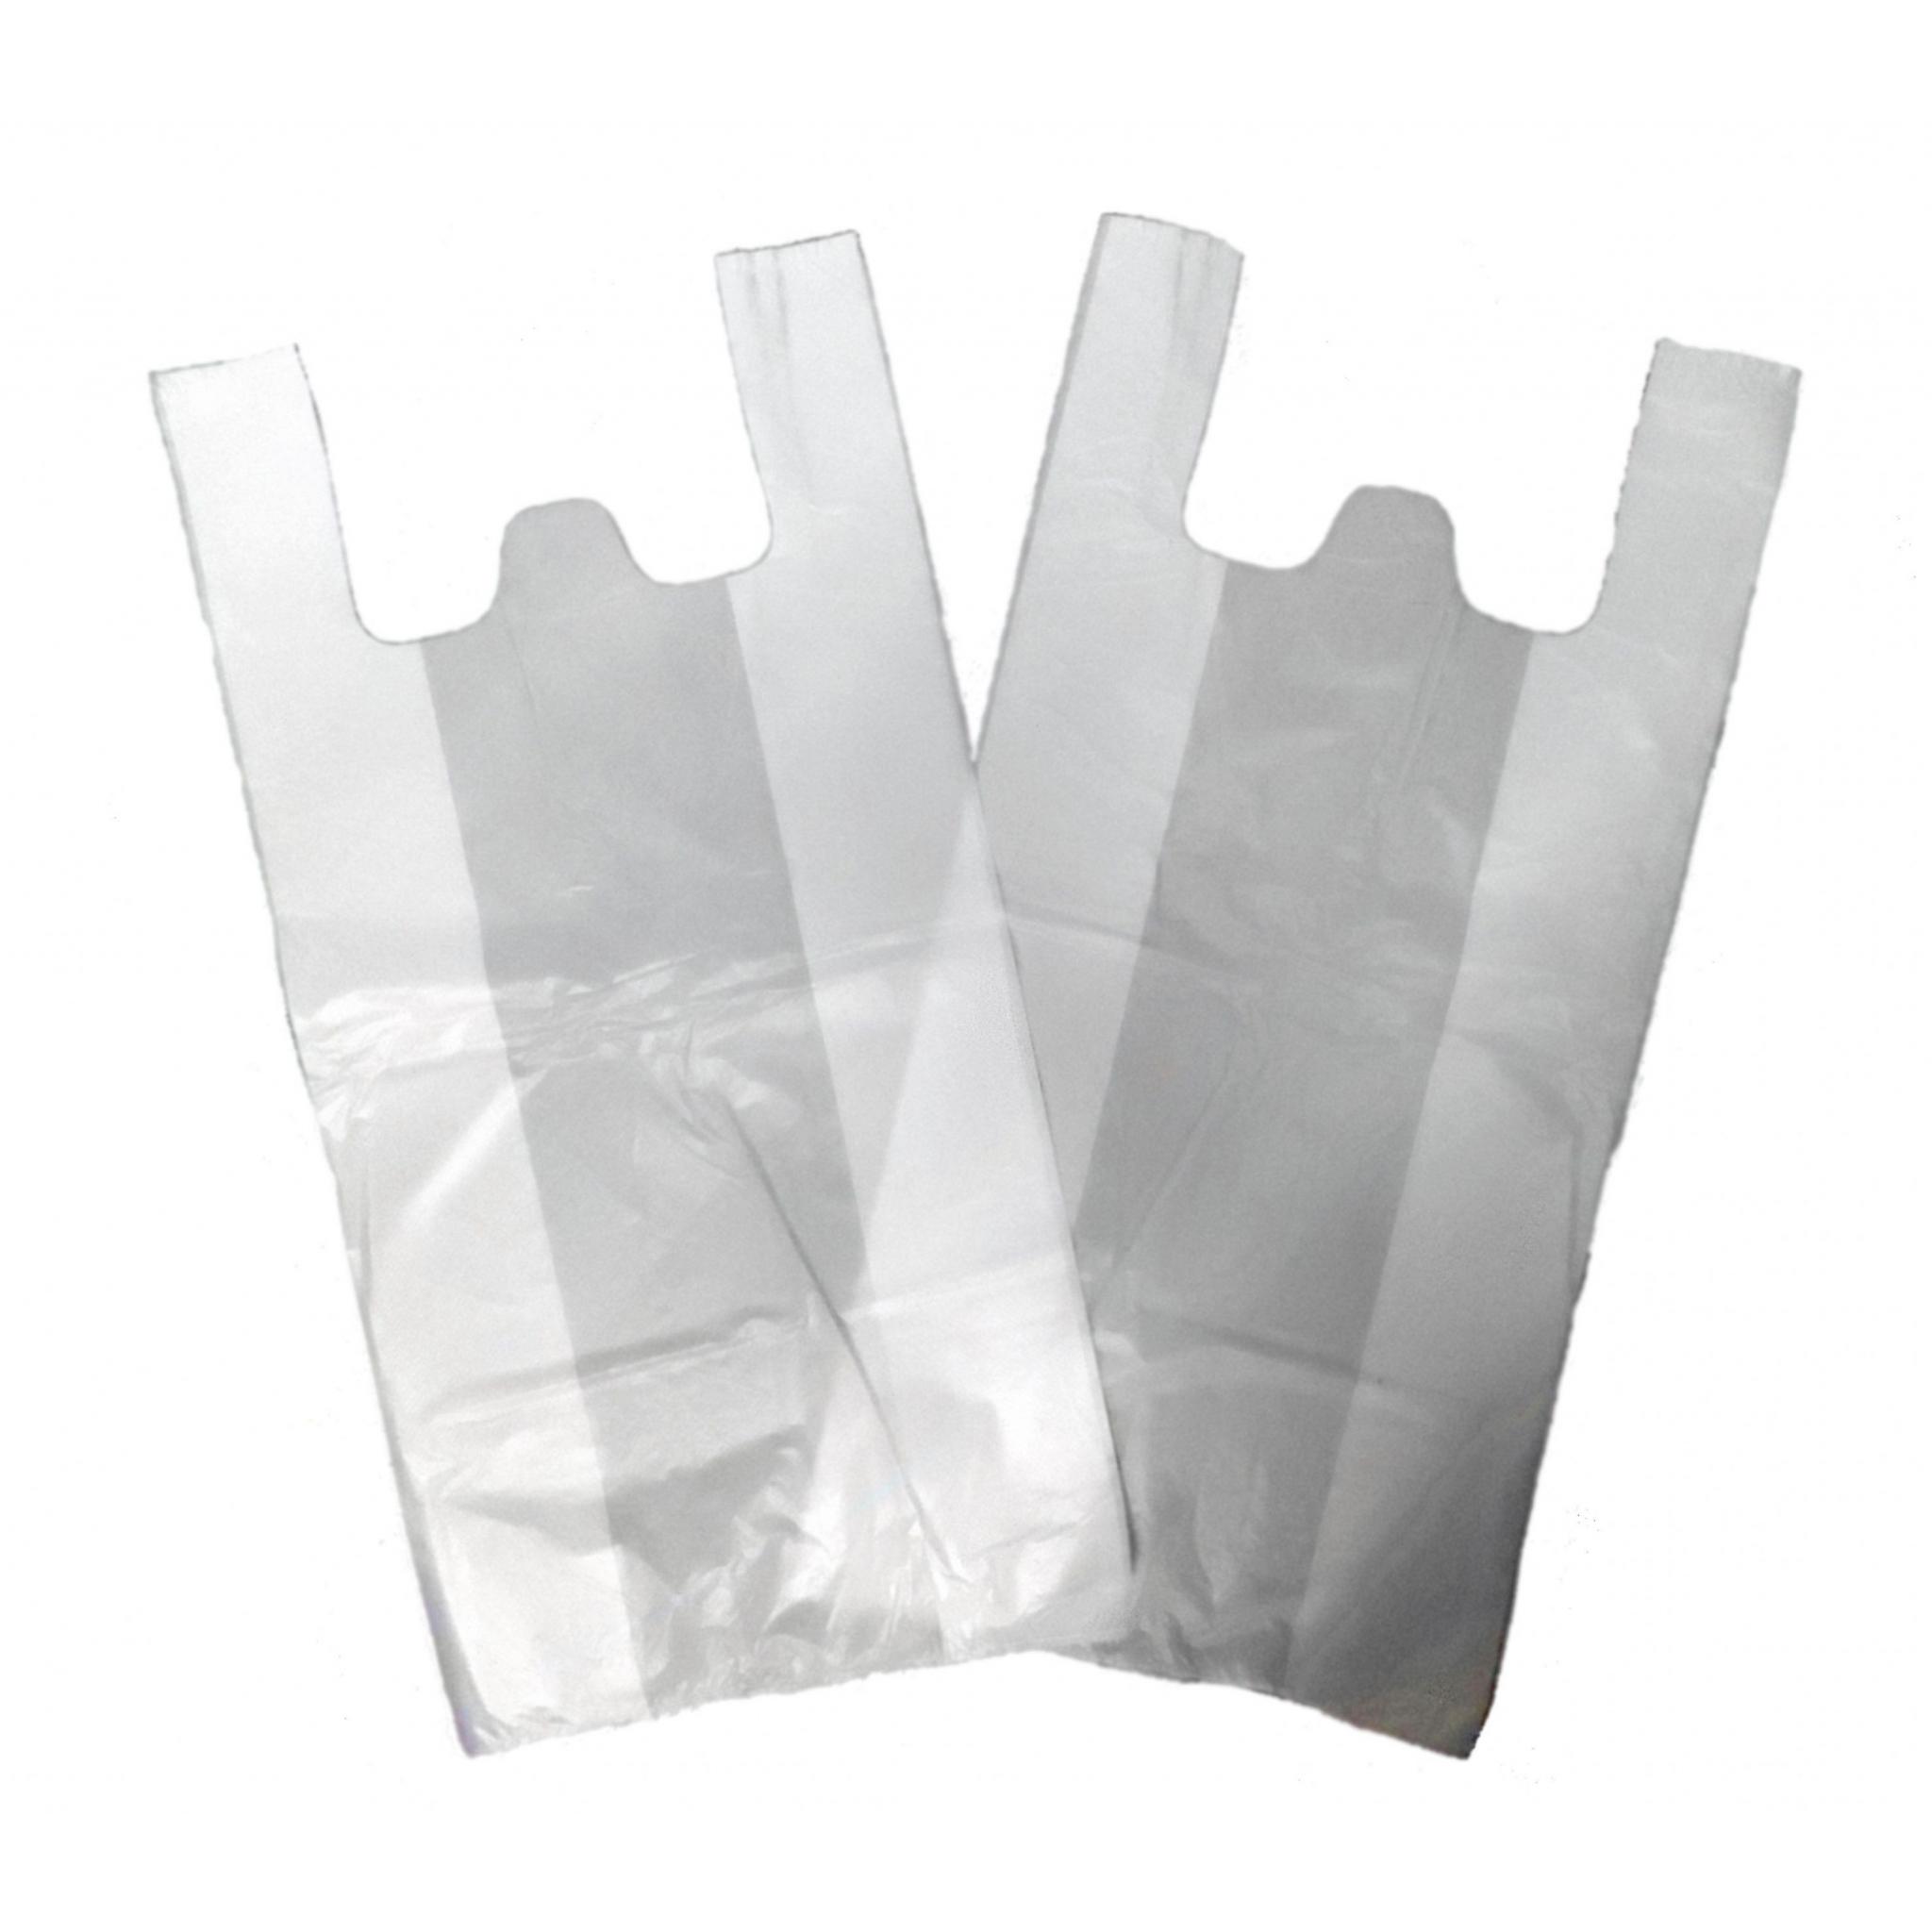 GREAT QUALITY BRAND NEW WHITE PLASTIC VEST CARRIER SHOPPING BAGS 11x17x21" 